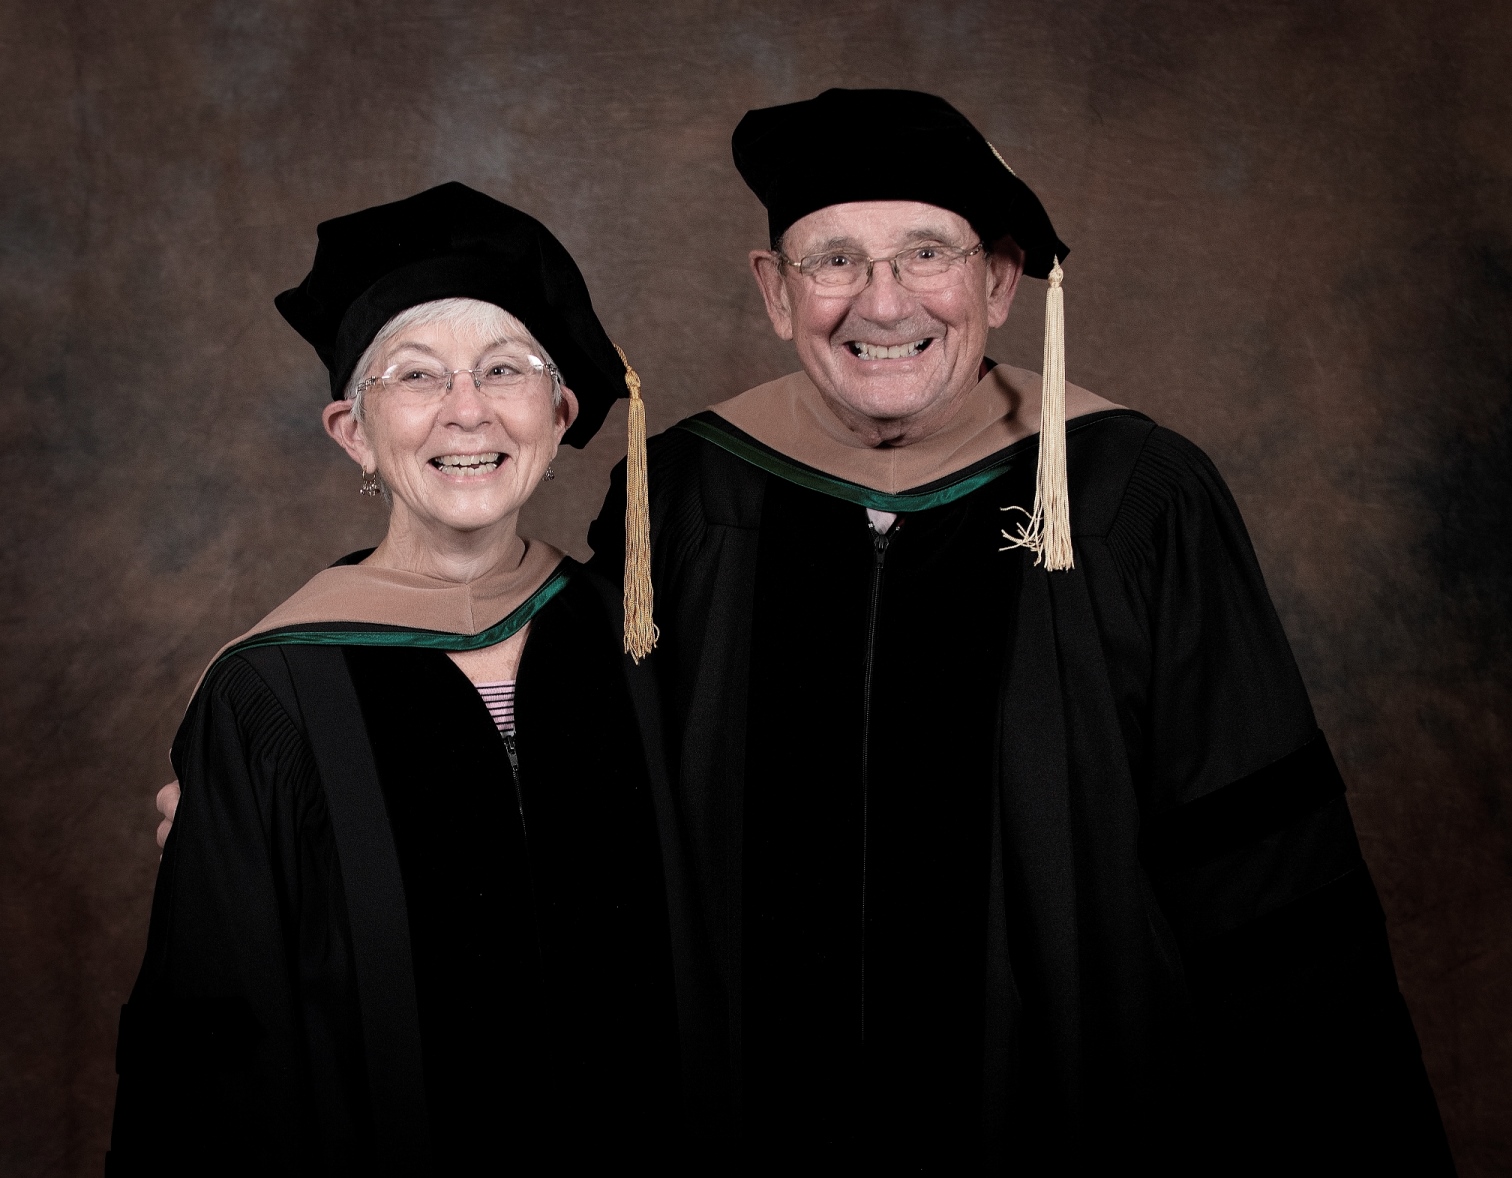 Longtime Maine residents Joseph and Suzanne Cyr both attended Husson University where Sue received an associate degree in legal secretarial science. A couple of years after graduating, Sue worked for college President Chesley Husson, Sr. Joe began a career in transportation and eventually became the owner/operator of John T. Cyr and Sons in 1967. 

Later in her career, Sue joined Joe at Cyr Bus Lines and began Cyr Northstar Tours. Joe has been an active member of Husson’s Board of Trustees since 1992, while Sue is a member of the University’s Women’s Philanthropy Council. They have both been loyal supporters of growth and scholarship initiatives at Husson. These initiatives have enhanced the University’s ability to deliver a world class, professional education to its students.

